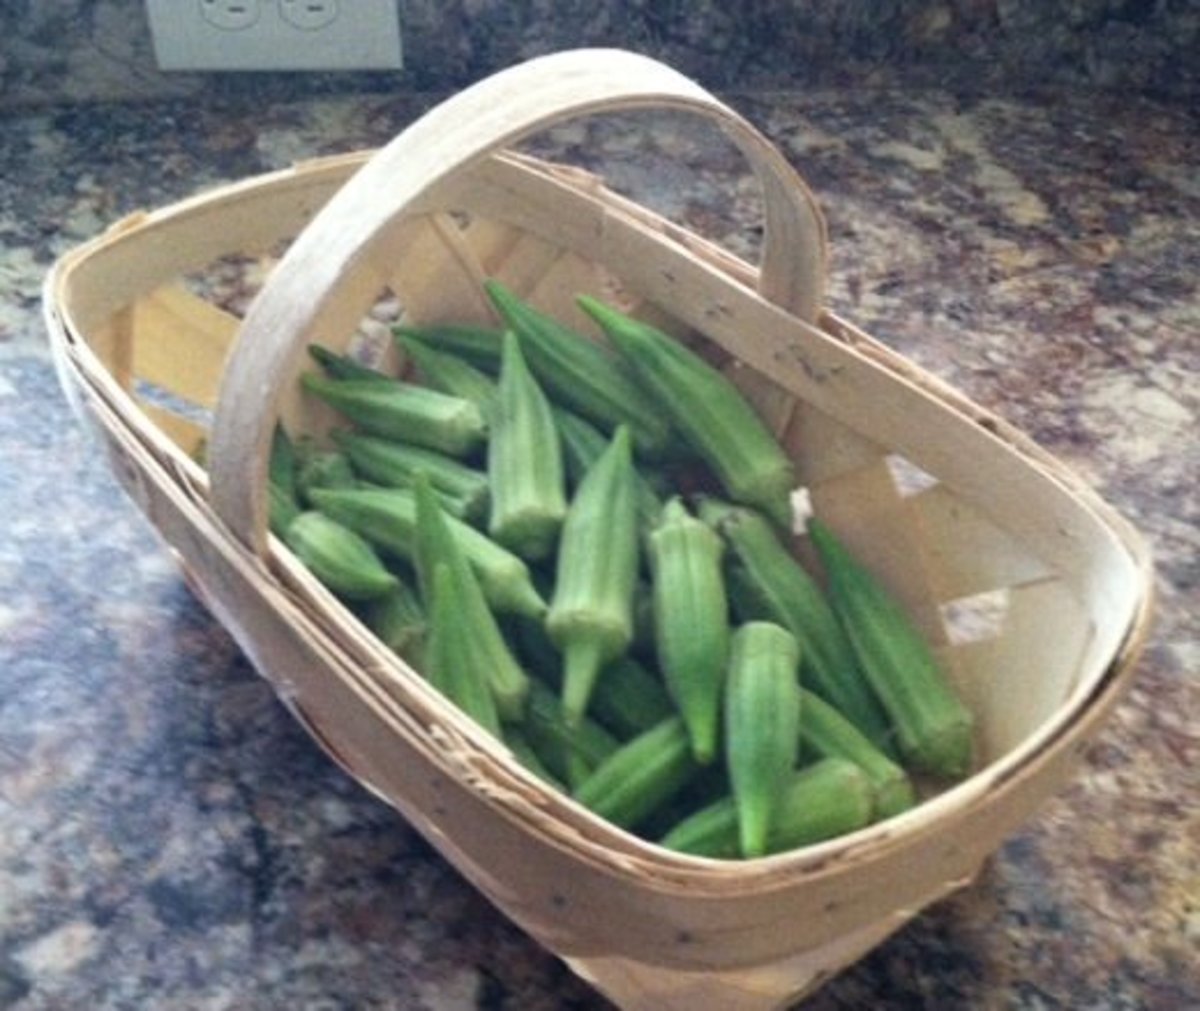 Freshly cut okra. Just look at this beautiful okra that was picked the morning this photo was taken. I grew it in my flower beds when my only dedicated garden space was a small herb garden.